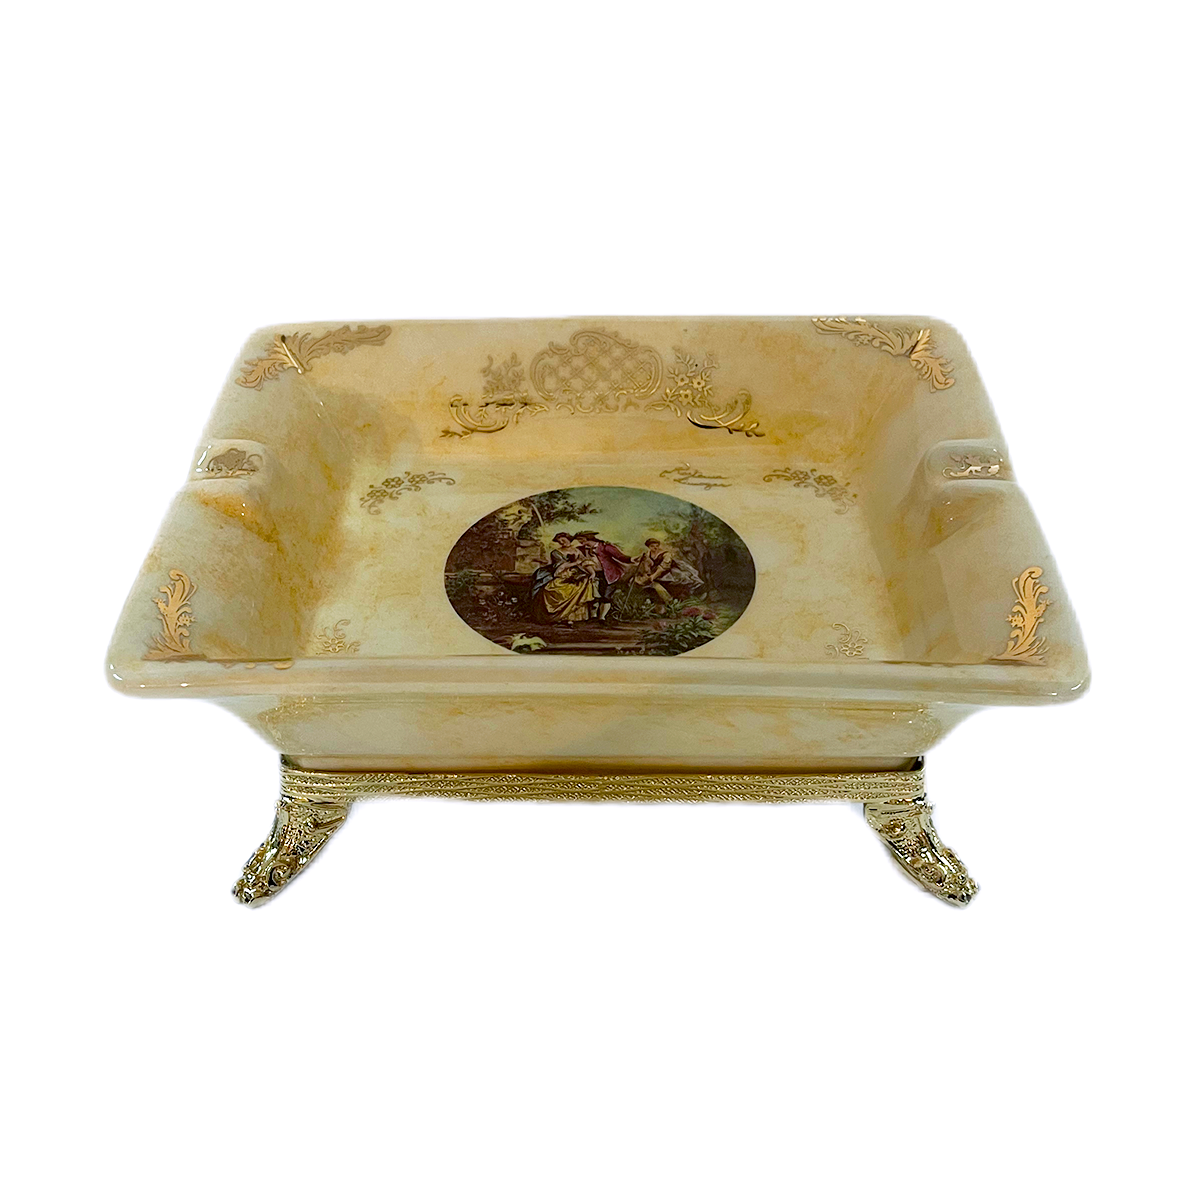 Limoge Rostema Square Ashtray with Gold Plated Legs -Romeo & Juliet -Beige & Gold -7x16x19 cm